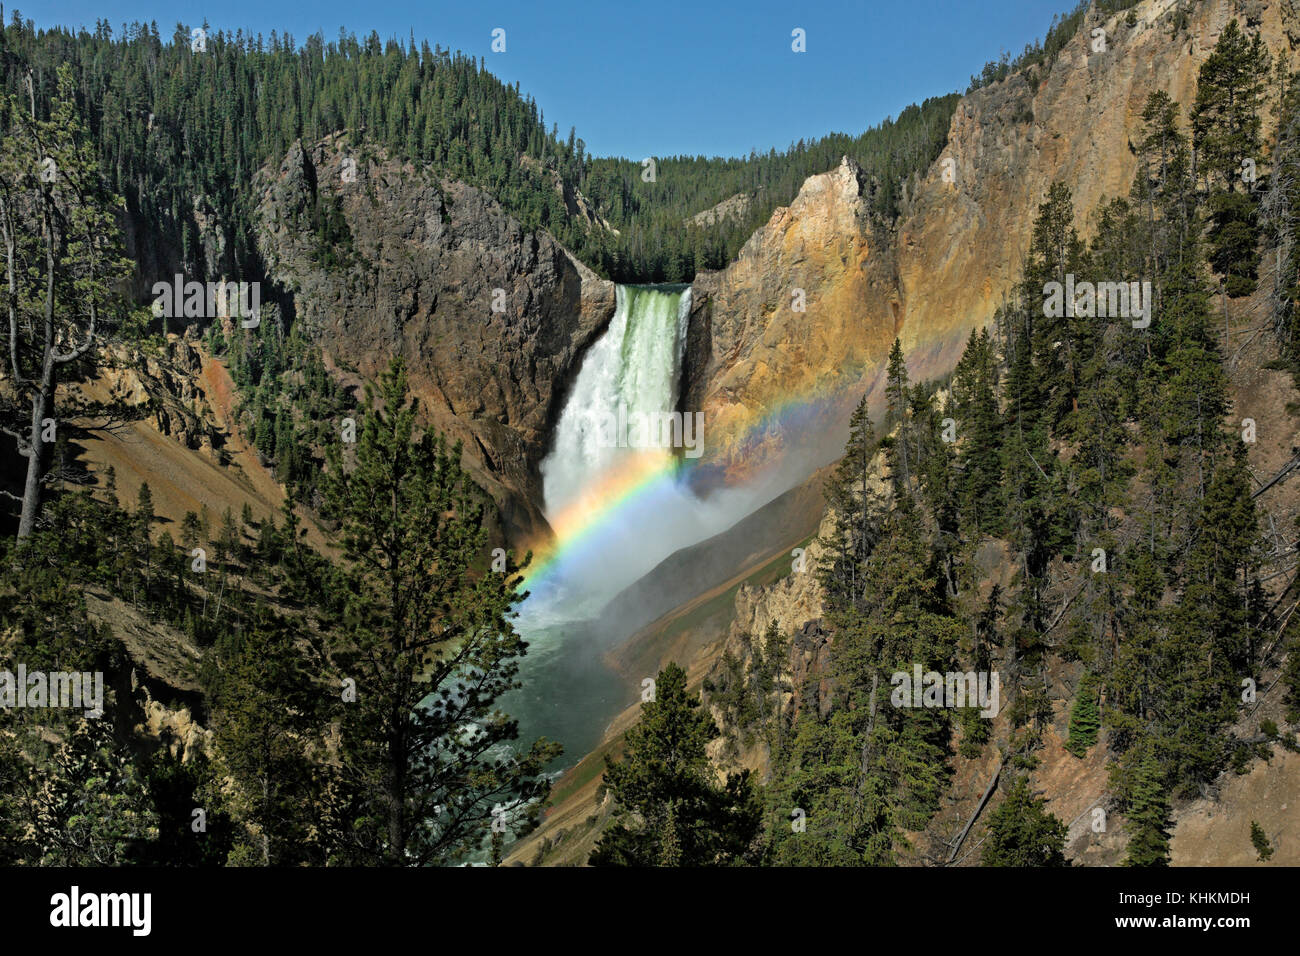 WY02628-00...WYOMING - Rainbow at Lower Falls from Red Rock Point in the Grand Canyon of the Yellowstone at Yellowstone National Park. Stock Photo